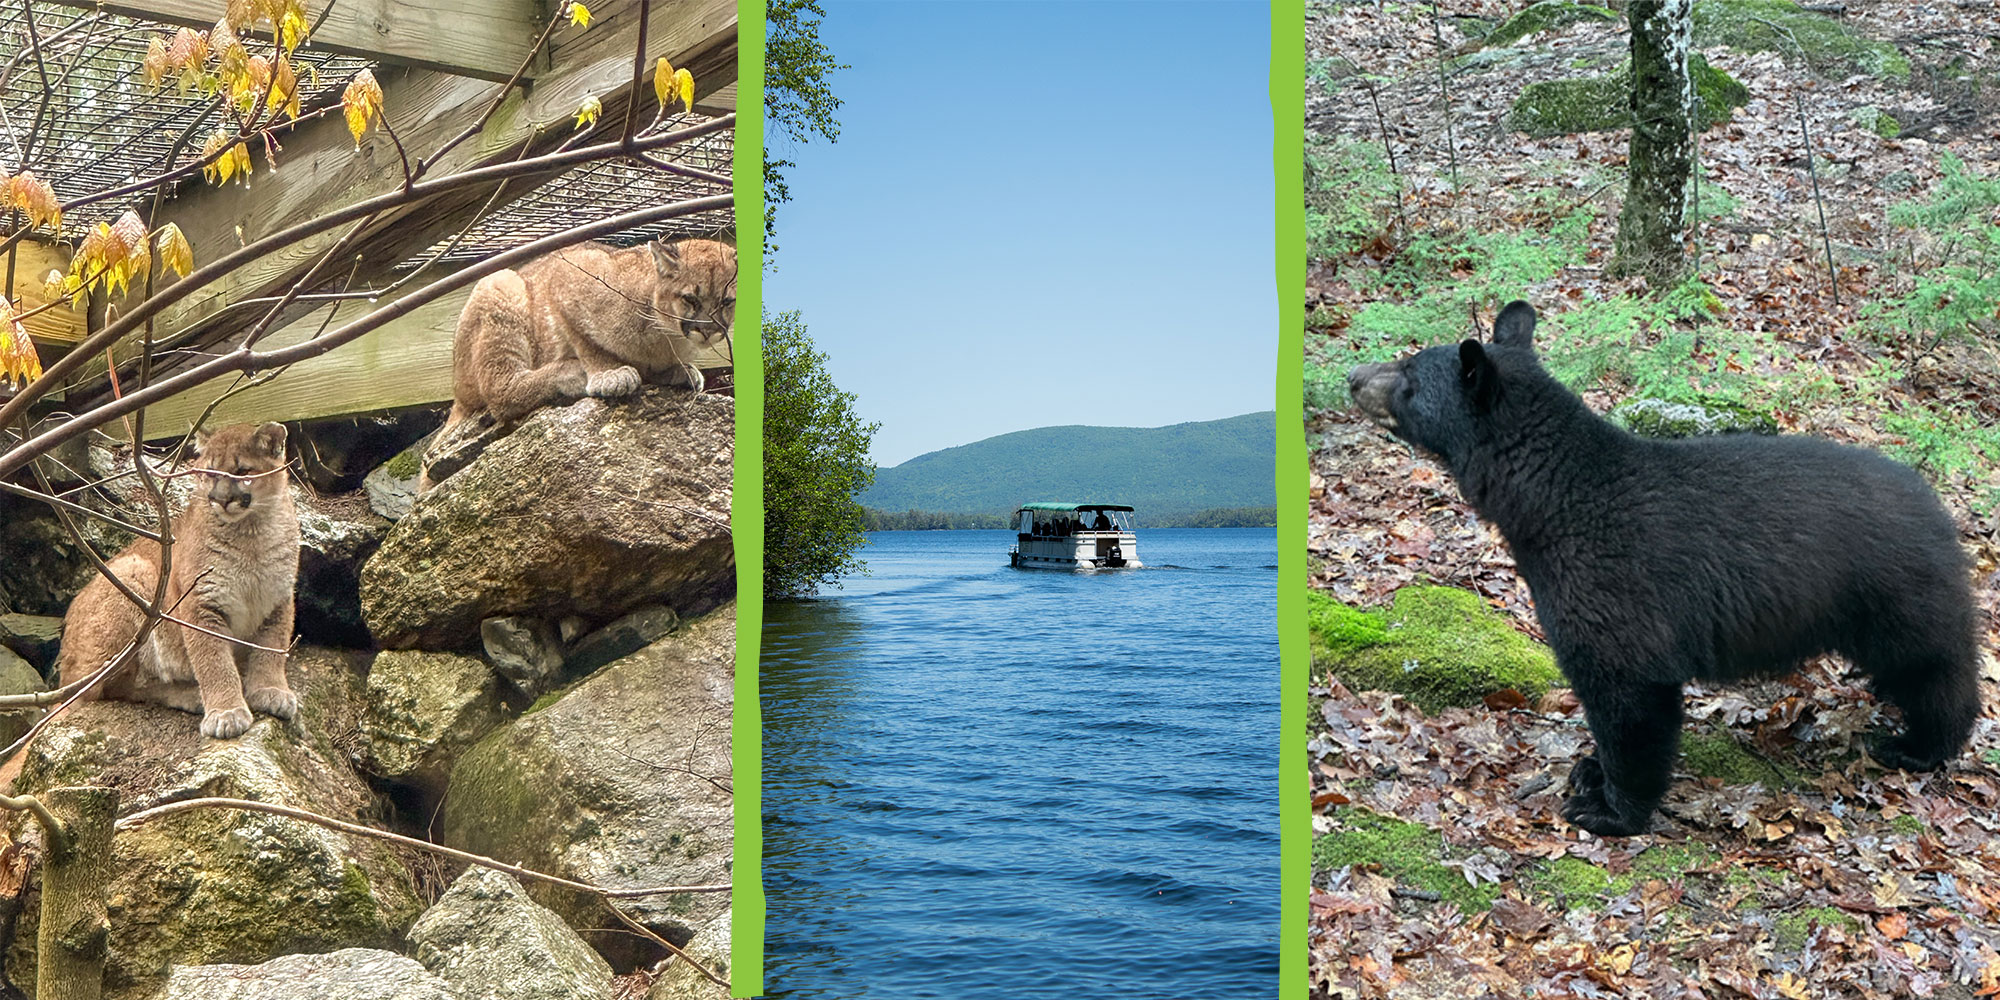 Two mountain lions on left, pontoon boat on Squam Lake center, and black bear on the right.